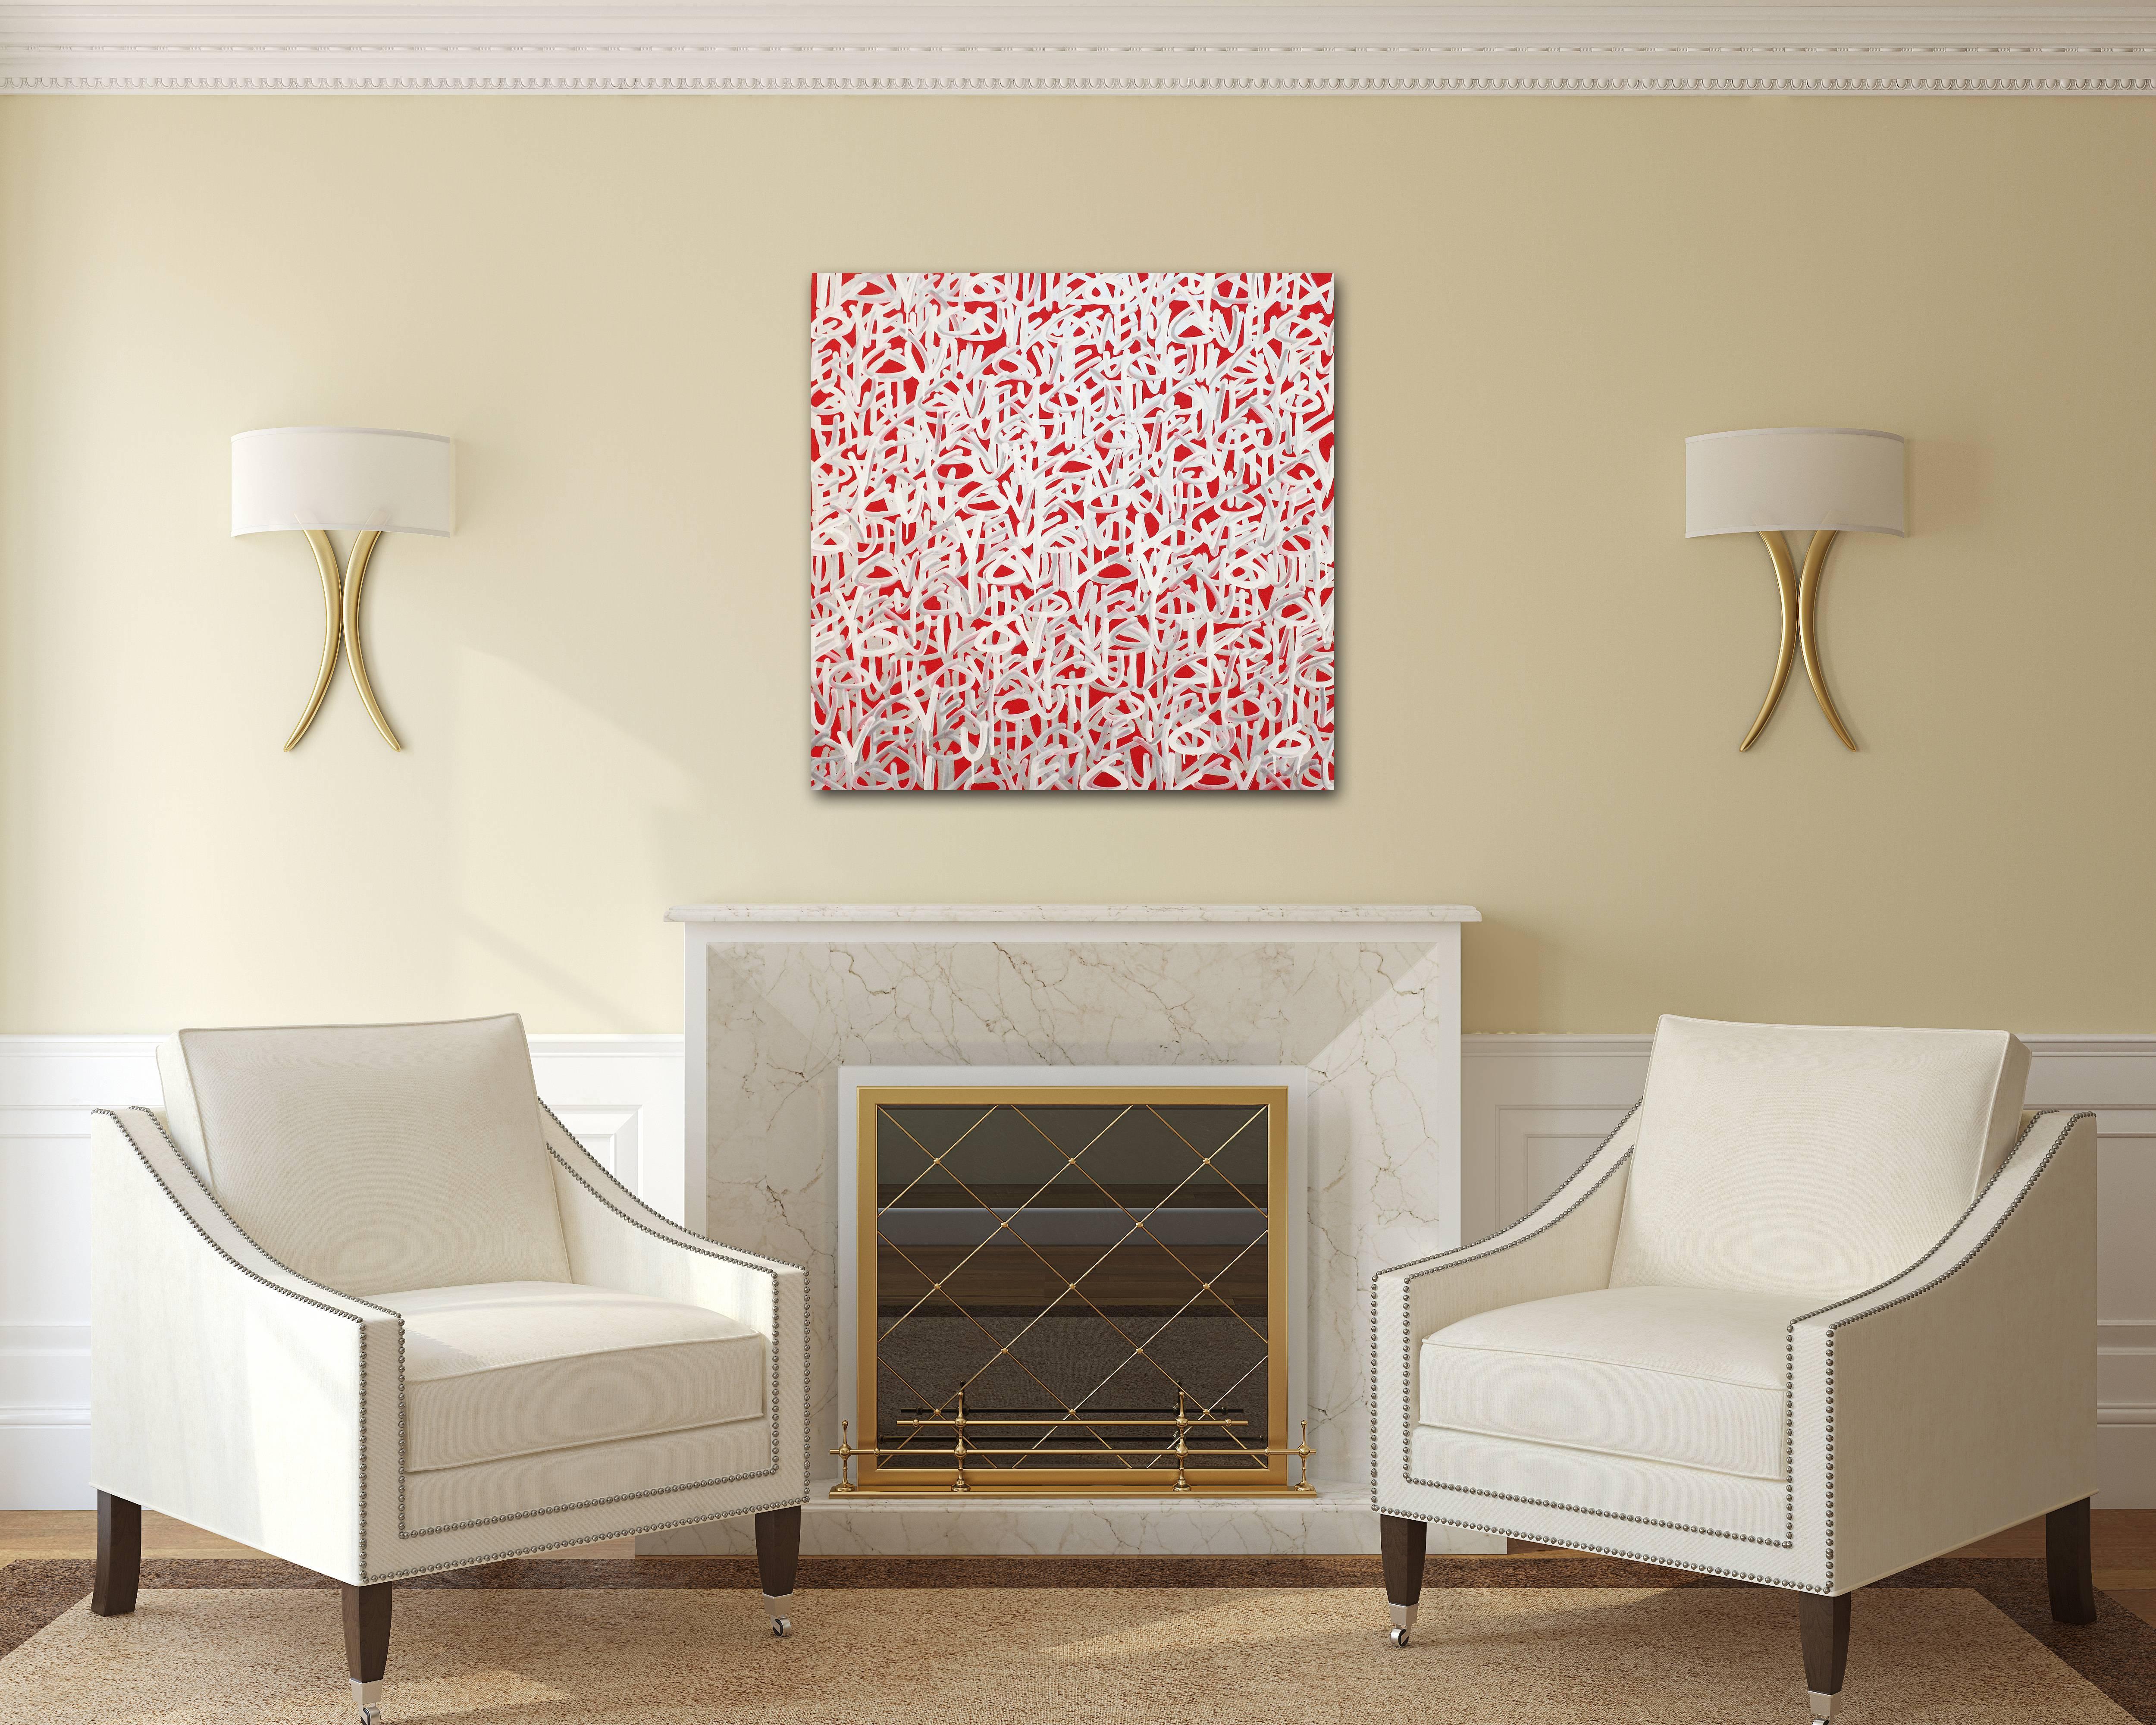 Red Hot Love - Painting by Amber Goldhammer